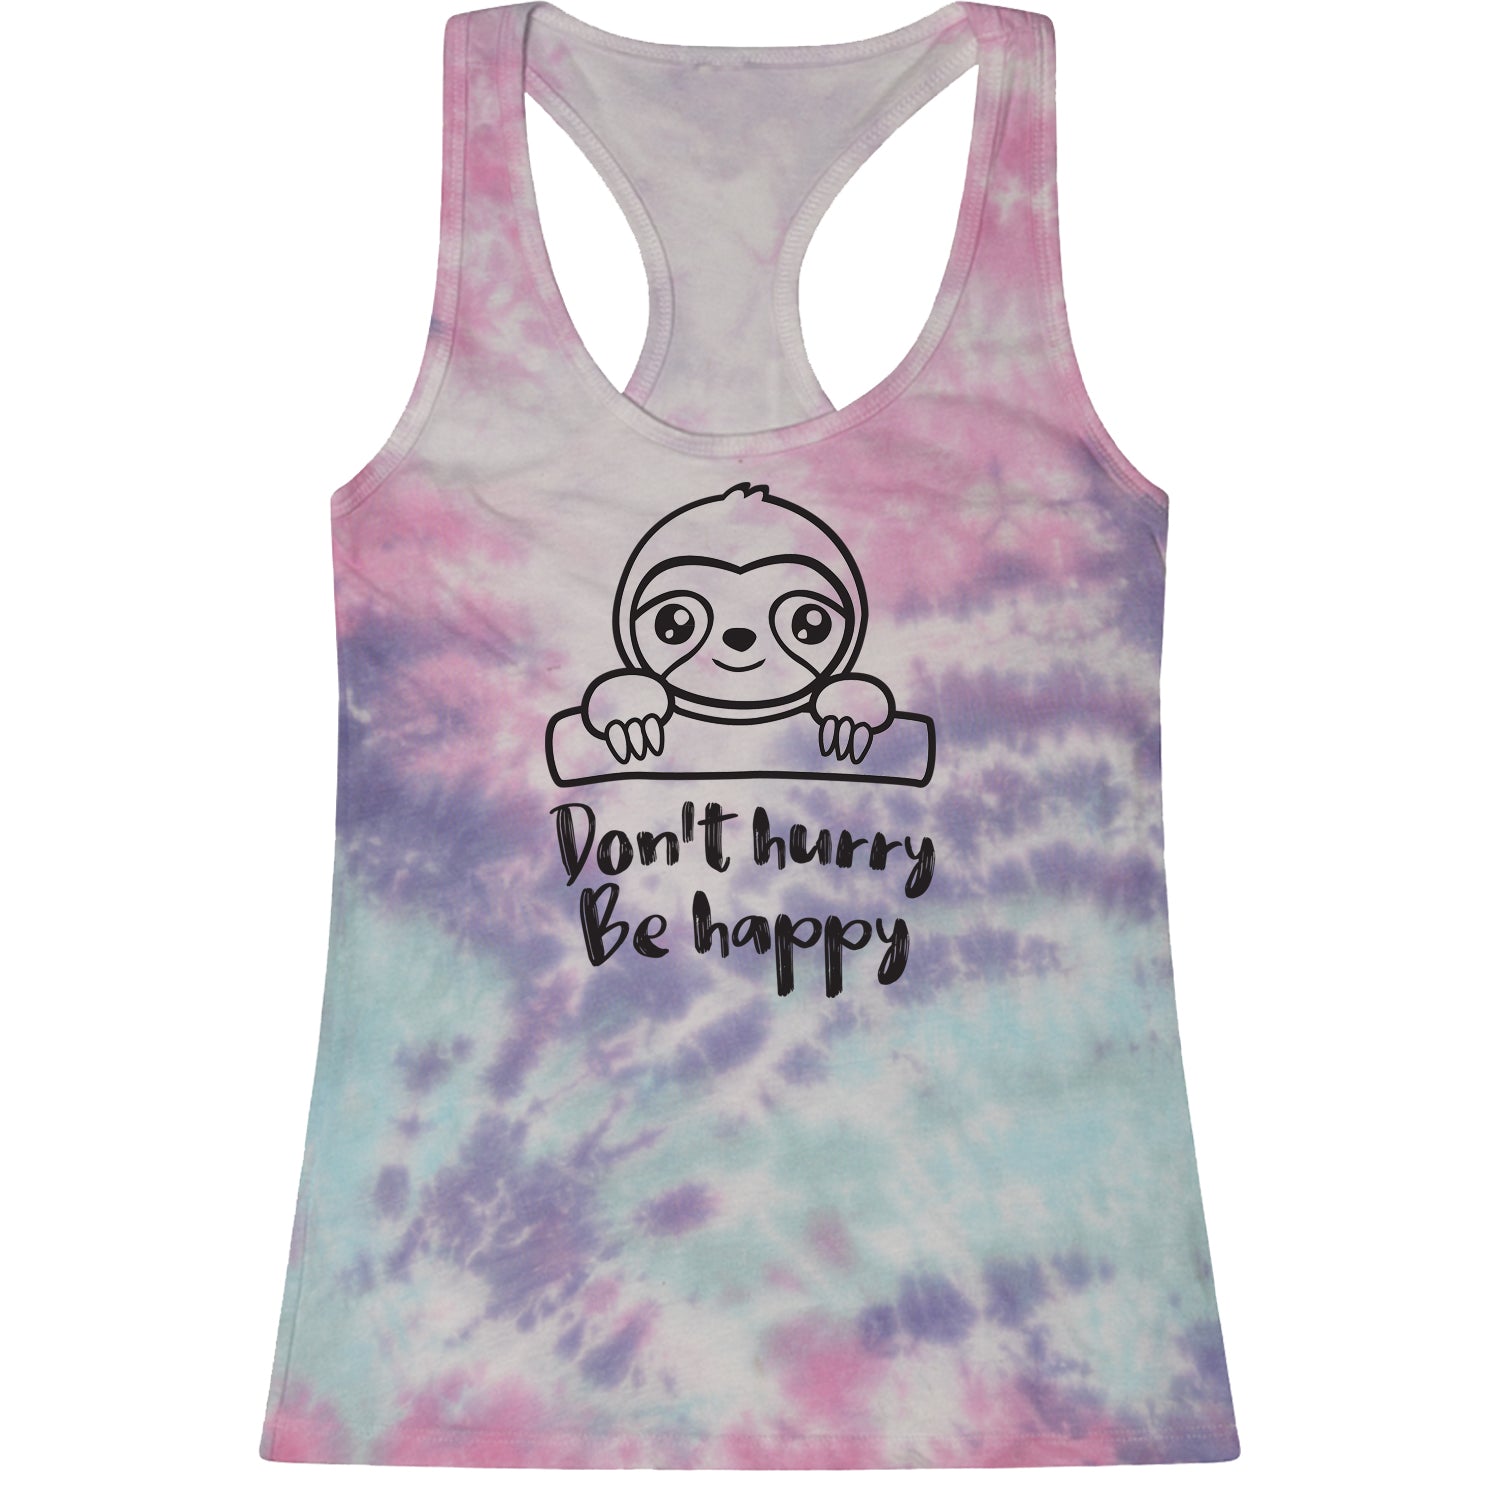 Sloth Don't Hurry Be Happy Racerback Tank Top for Women fun, funny, sloth, sloths by Expression Tees